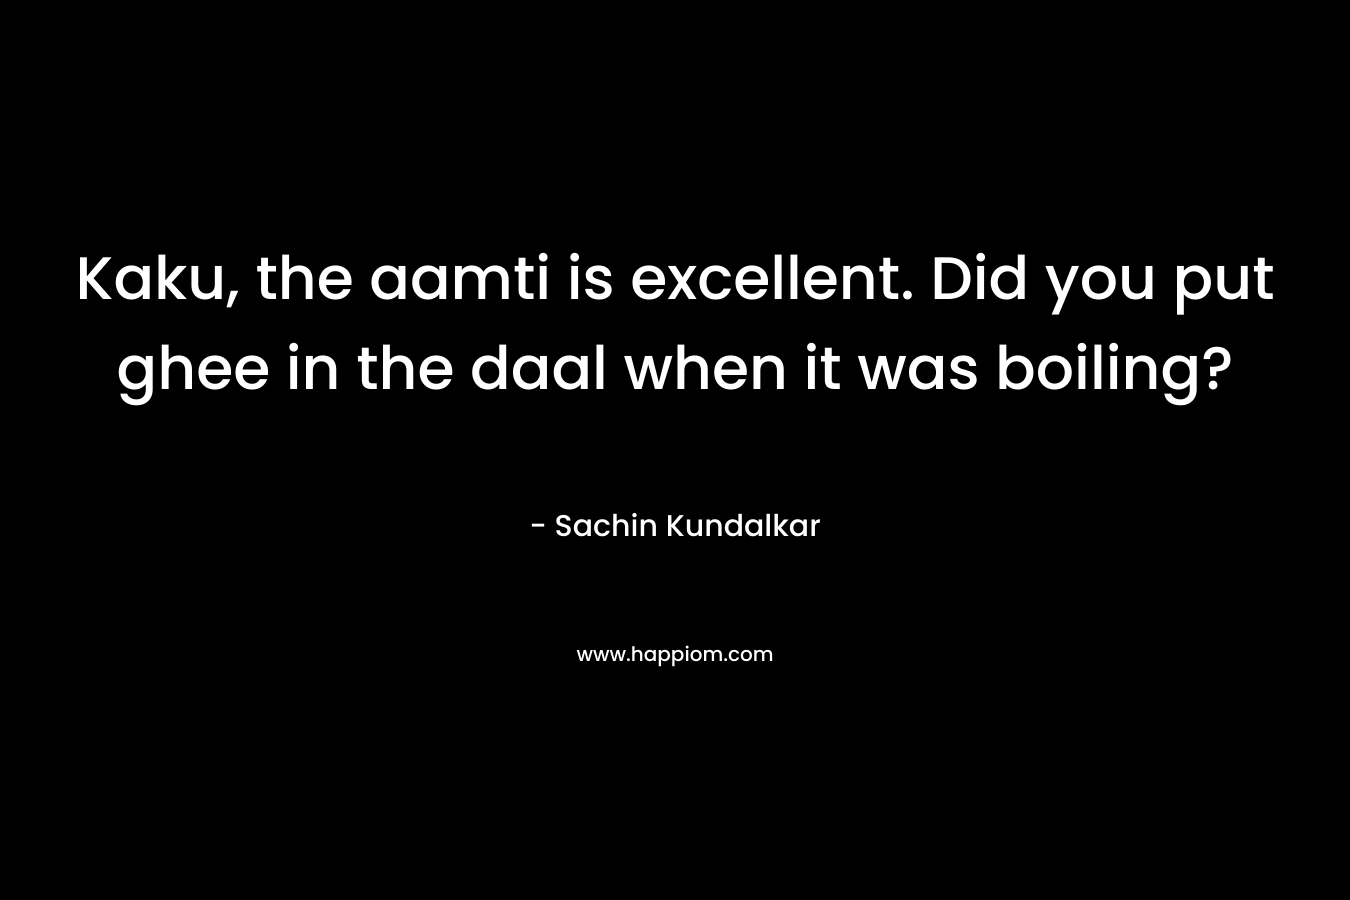 Kaku, the aamti is excellent. Did you put ghee in the daal when it was boiling? – Sachin Kundalkar